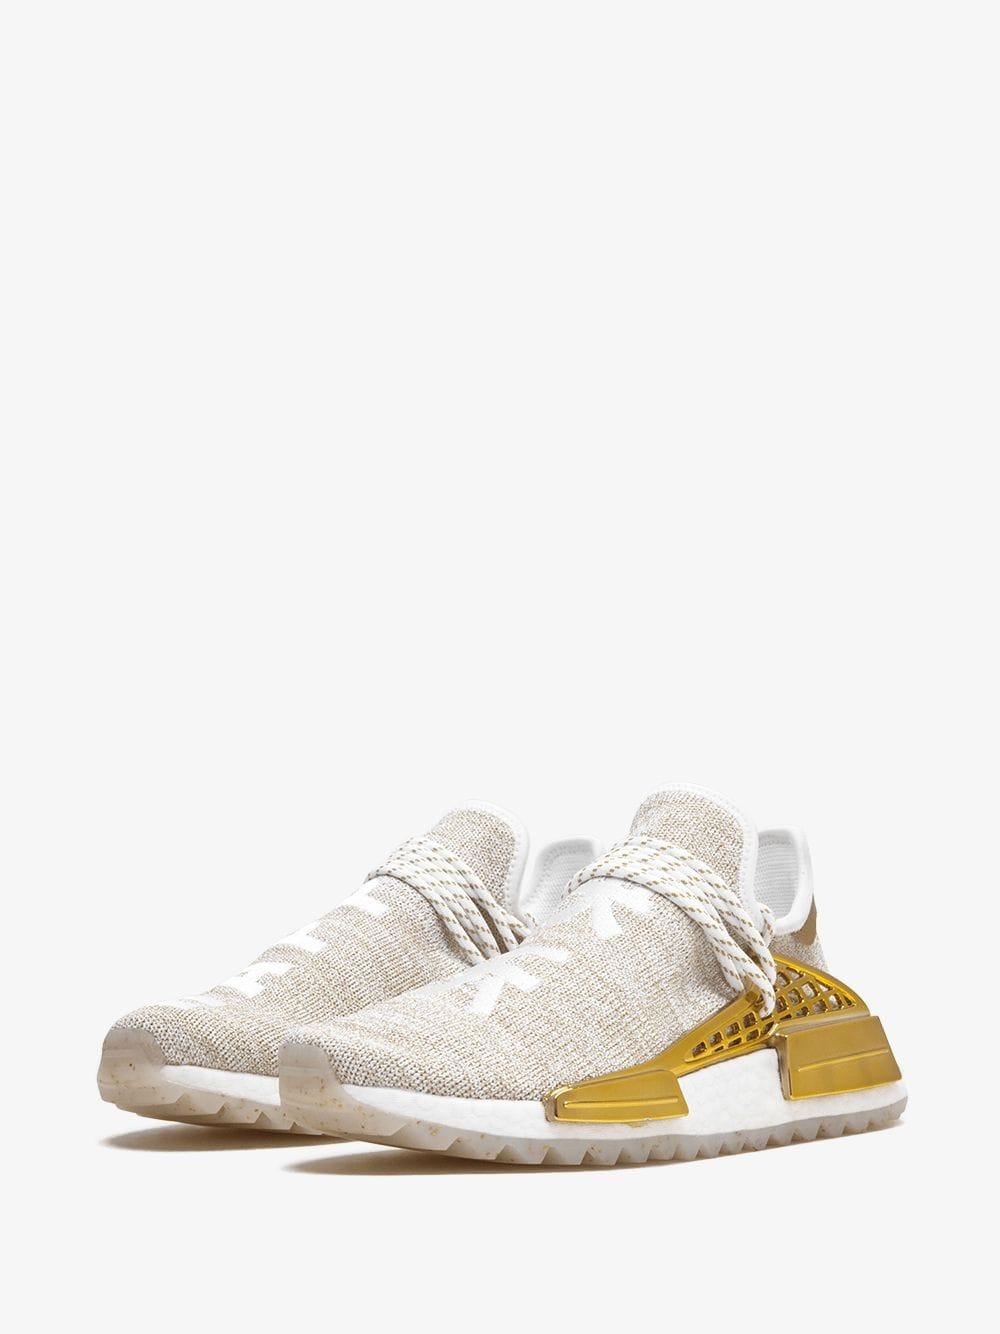 hazlo plano Incitar mil millones adidas Gold And White X Pharrell Williams Hu Holi Nmd Sneakers in Metallic  for Men | Lyst